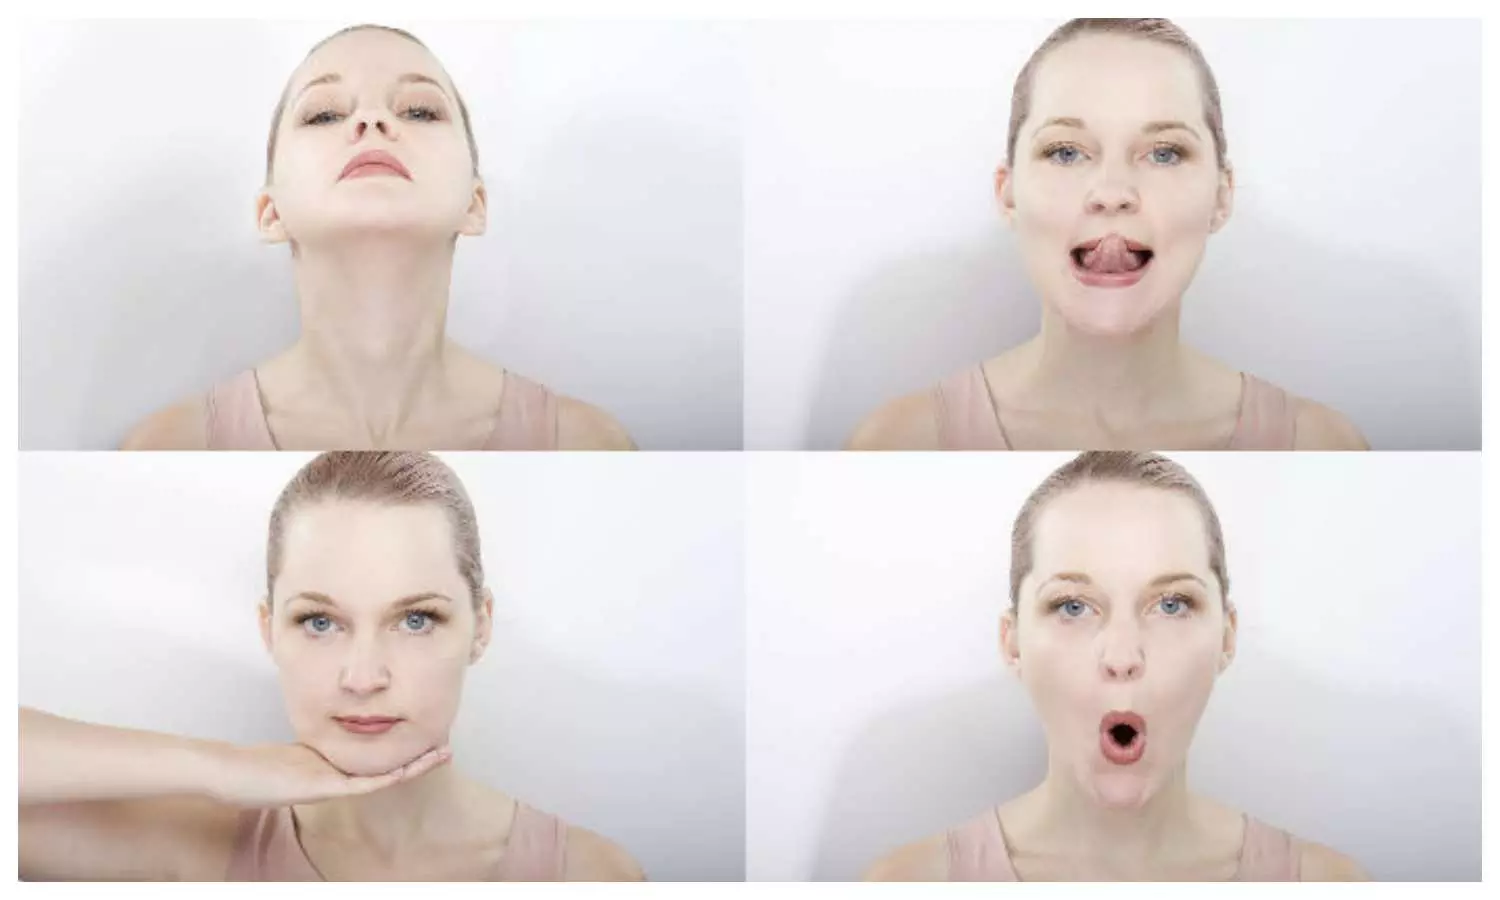 Exercise to Lose Face Fat